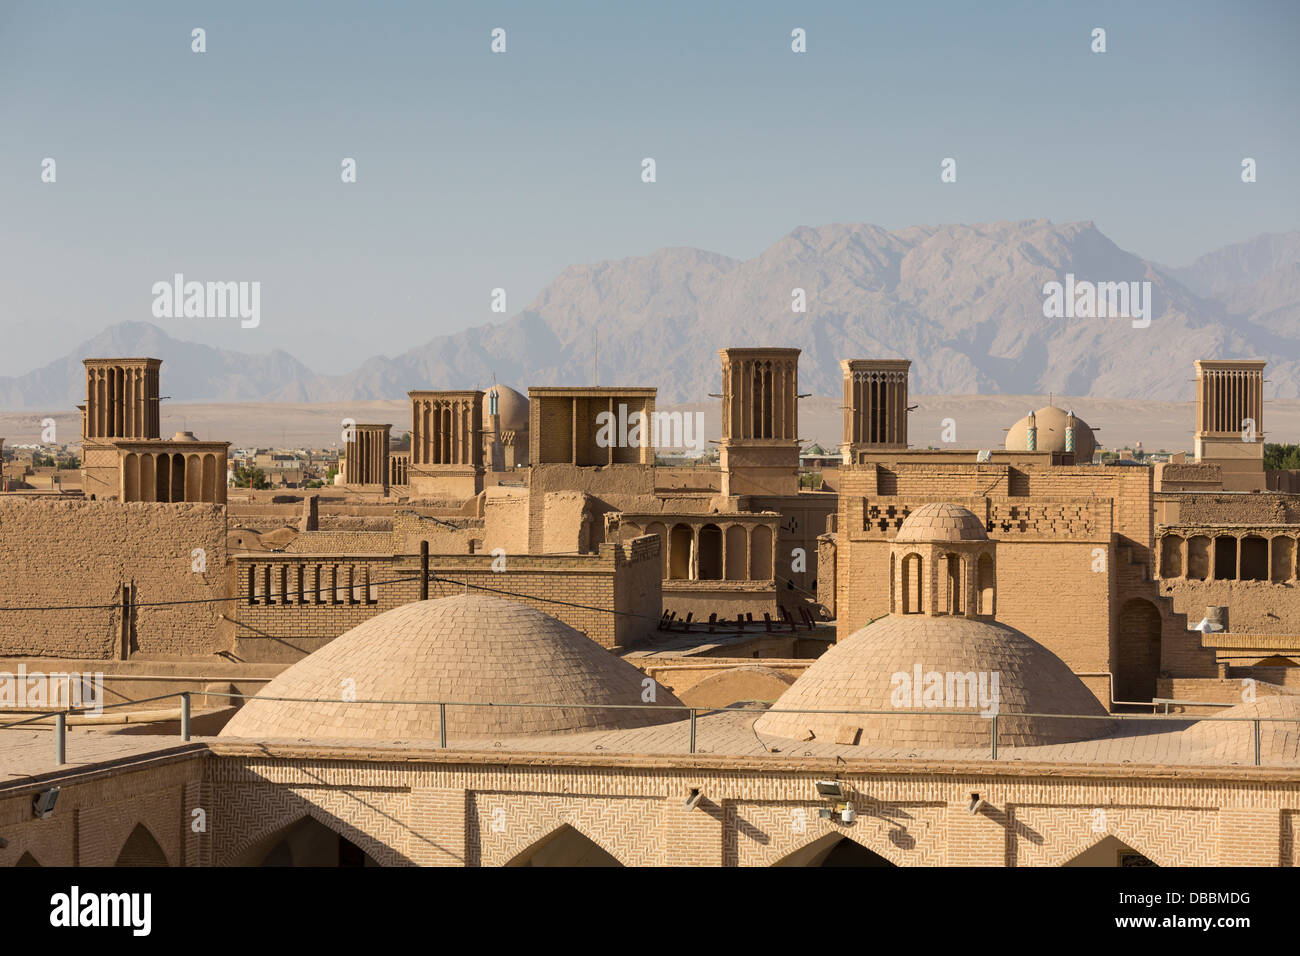 view of windcatchers (badgirs) from the roof of the Friday mosque Yazd, Iran Stock Photo